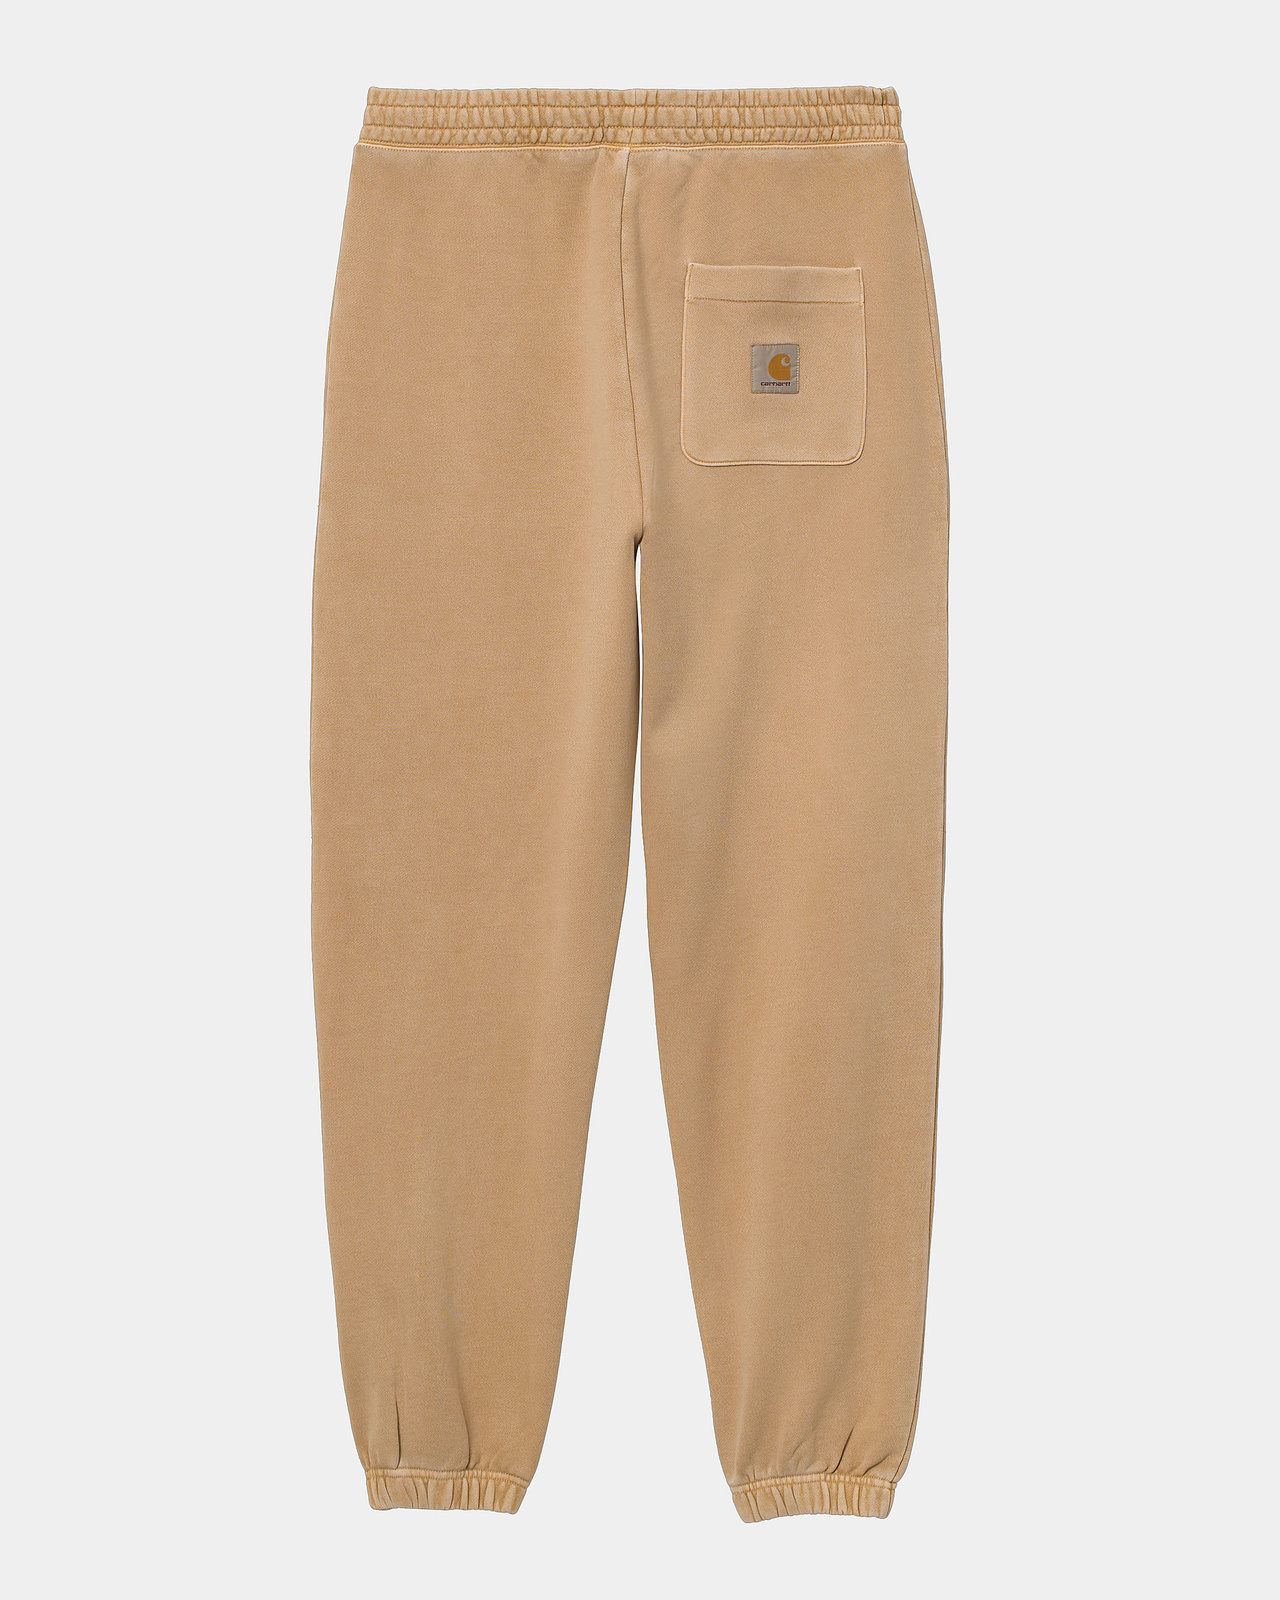 Nelson Sweat Pant - Dusty H Brown - XL